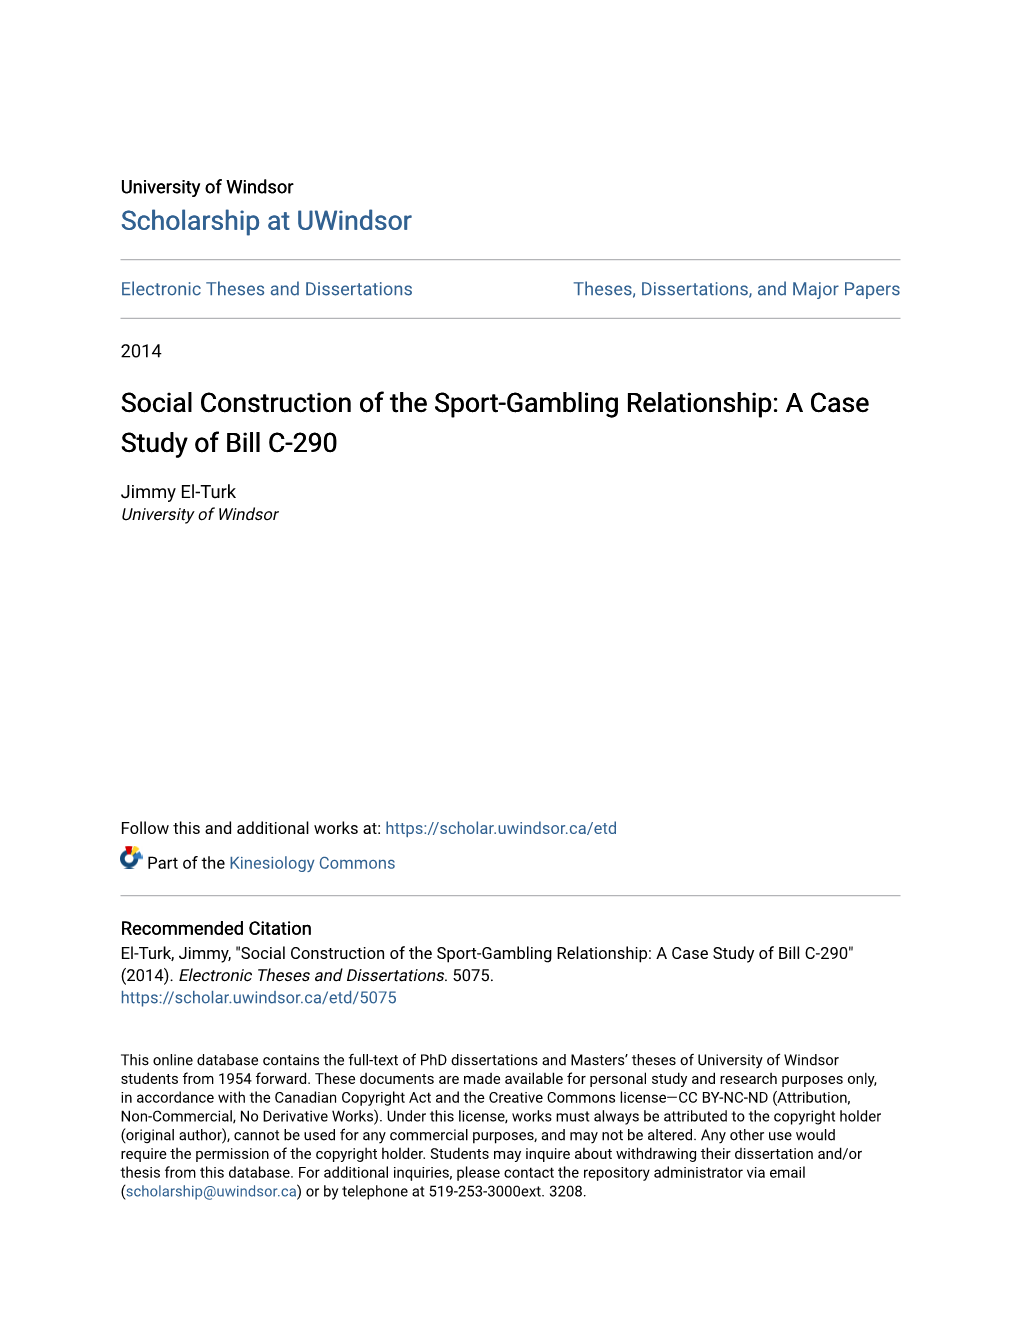 Social Construction of the Sport-Gambling Relationship: a Case Study of Bill C-290